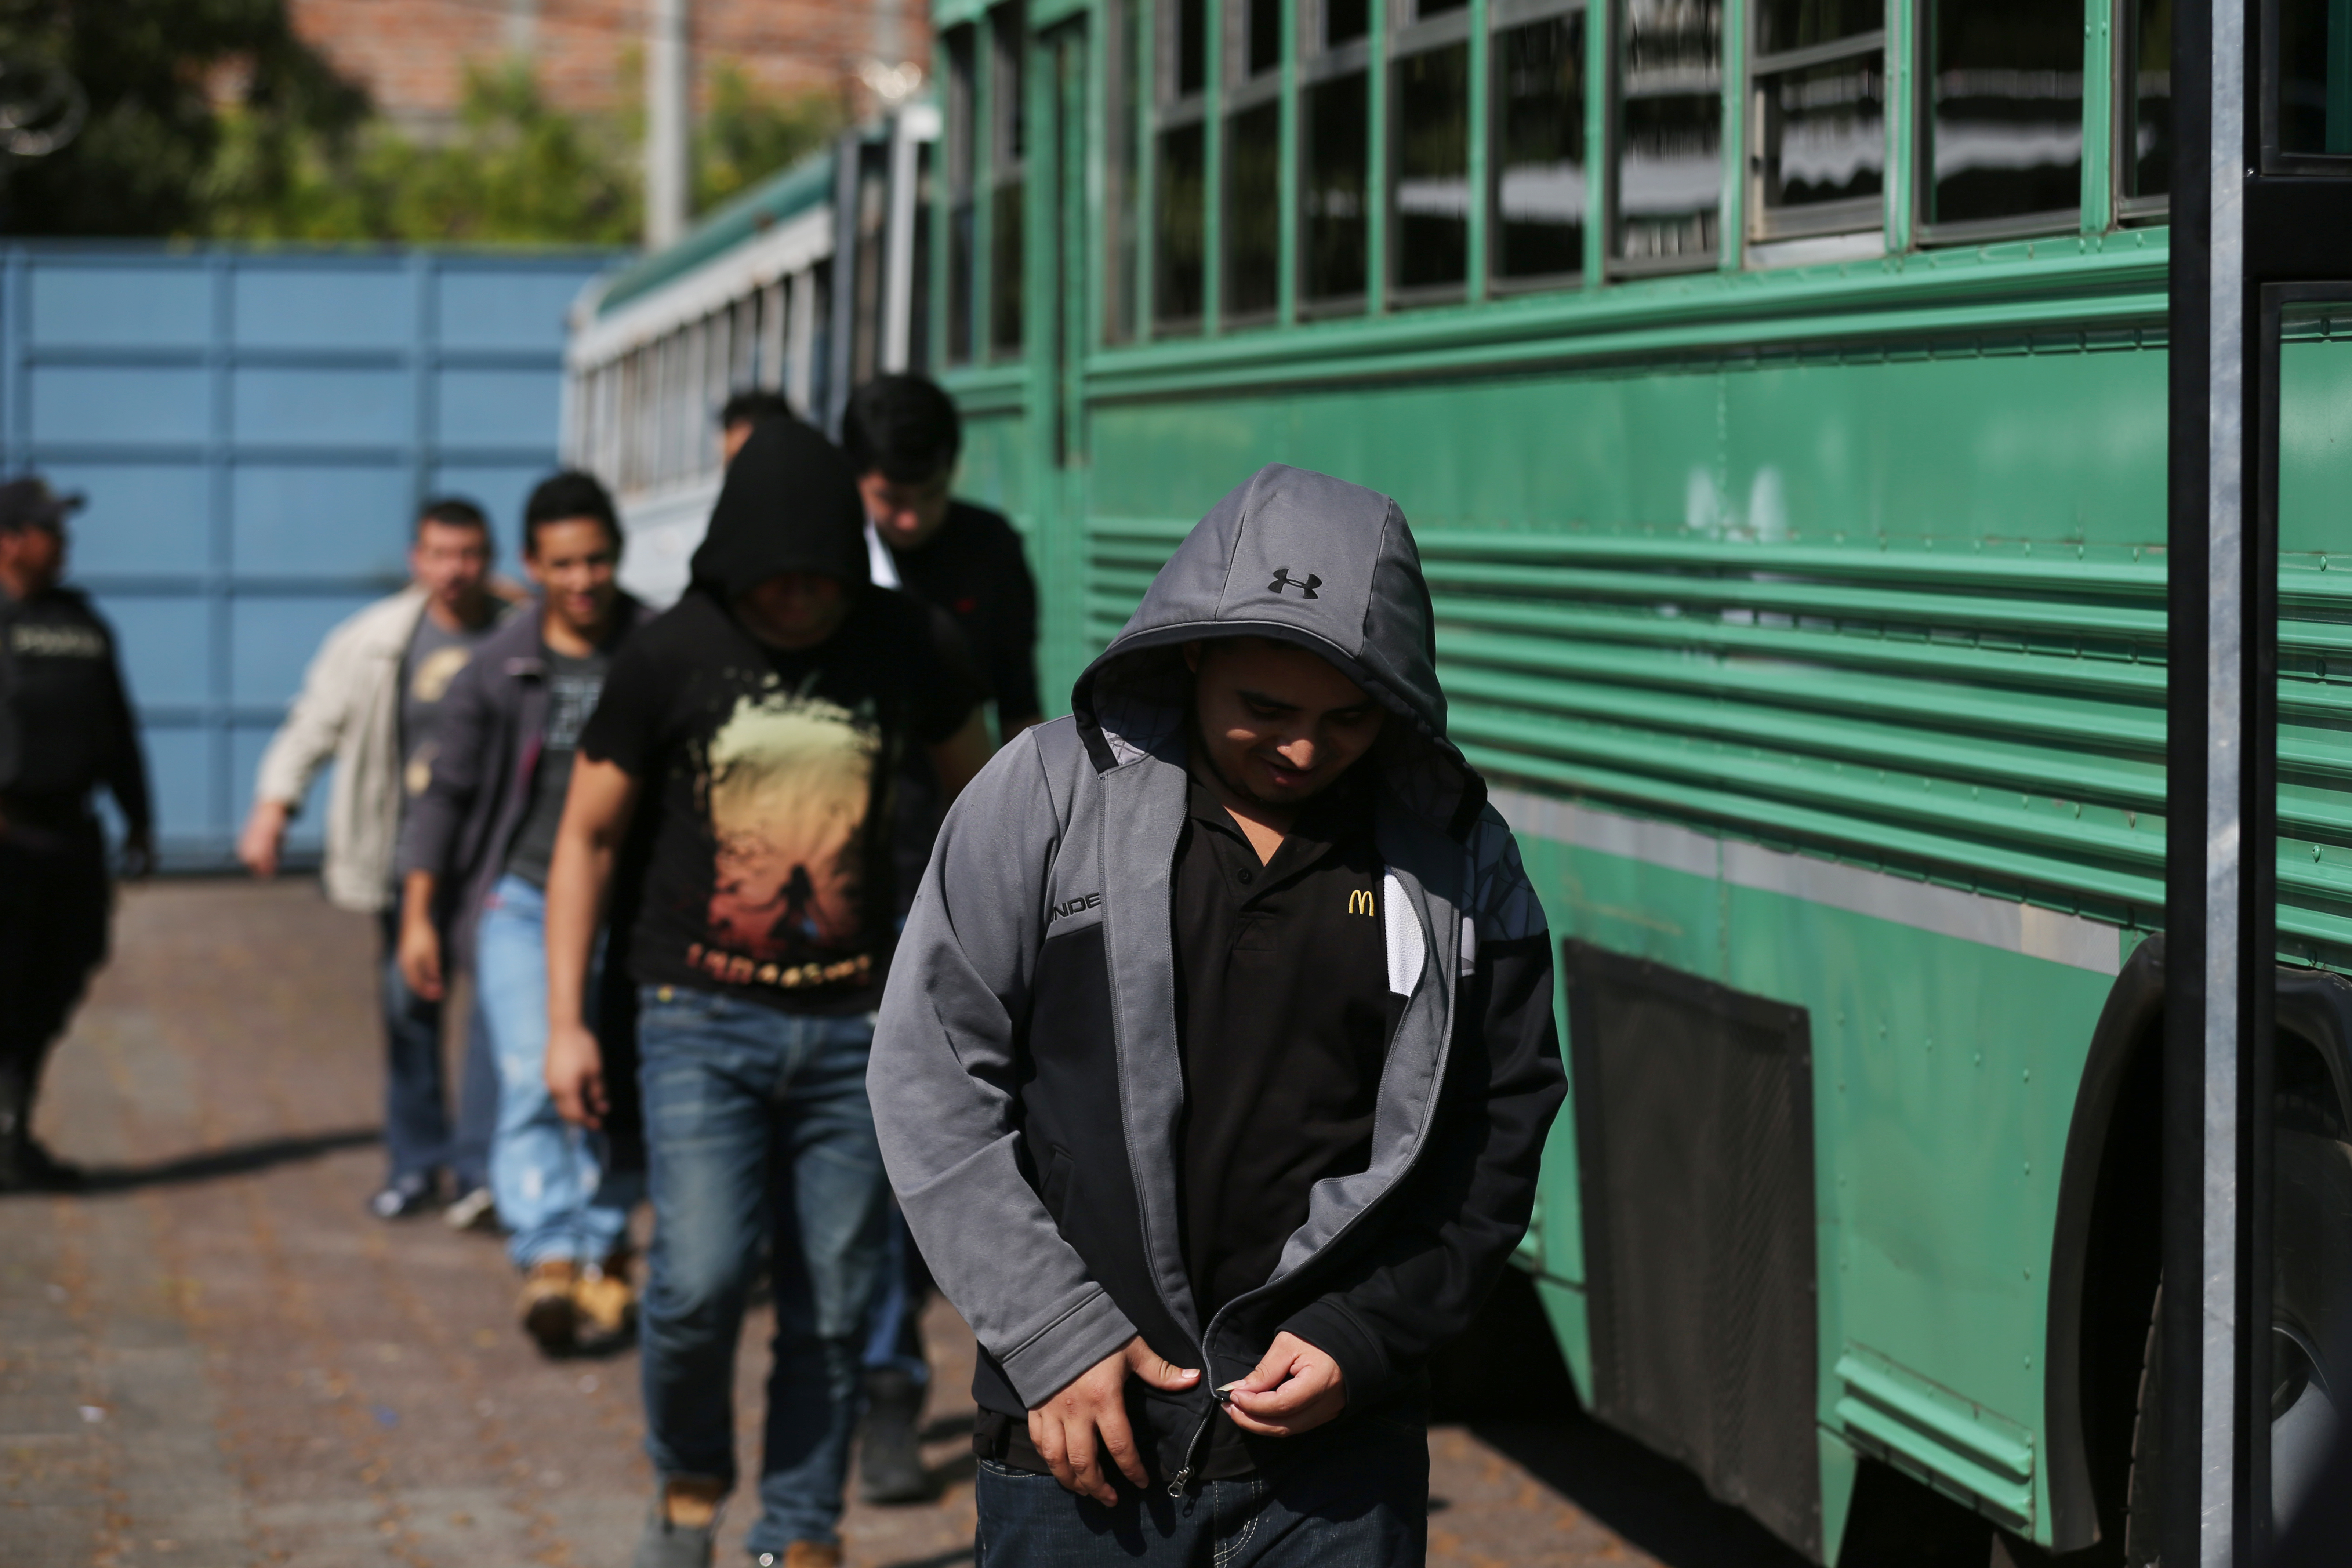 Deportees get off a bus at an immigration facility Jan. 11 after a flight arrived in San Salvador, El Salvador, with immigrants who were in the U.S. without documents. U.N. officials said Jan. 12 that U.S. President Donald Trump's reported use of an exple